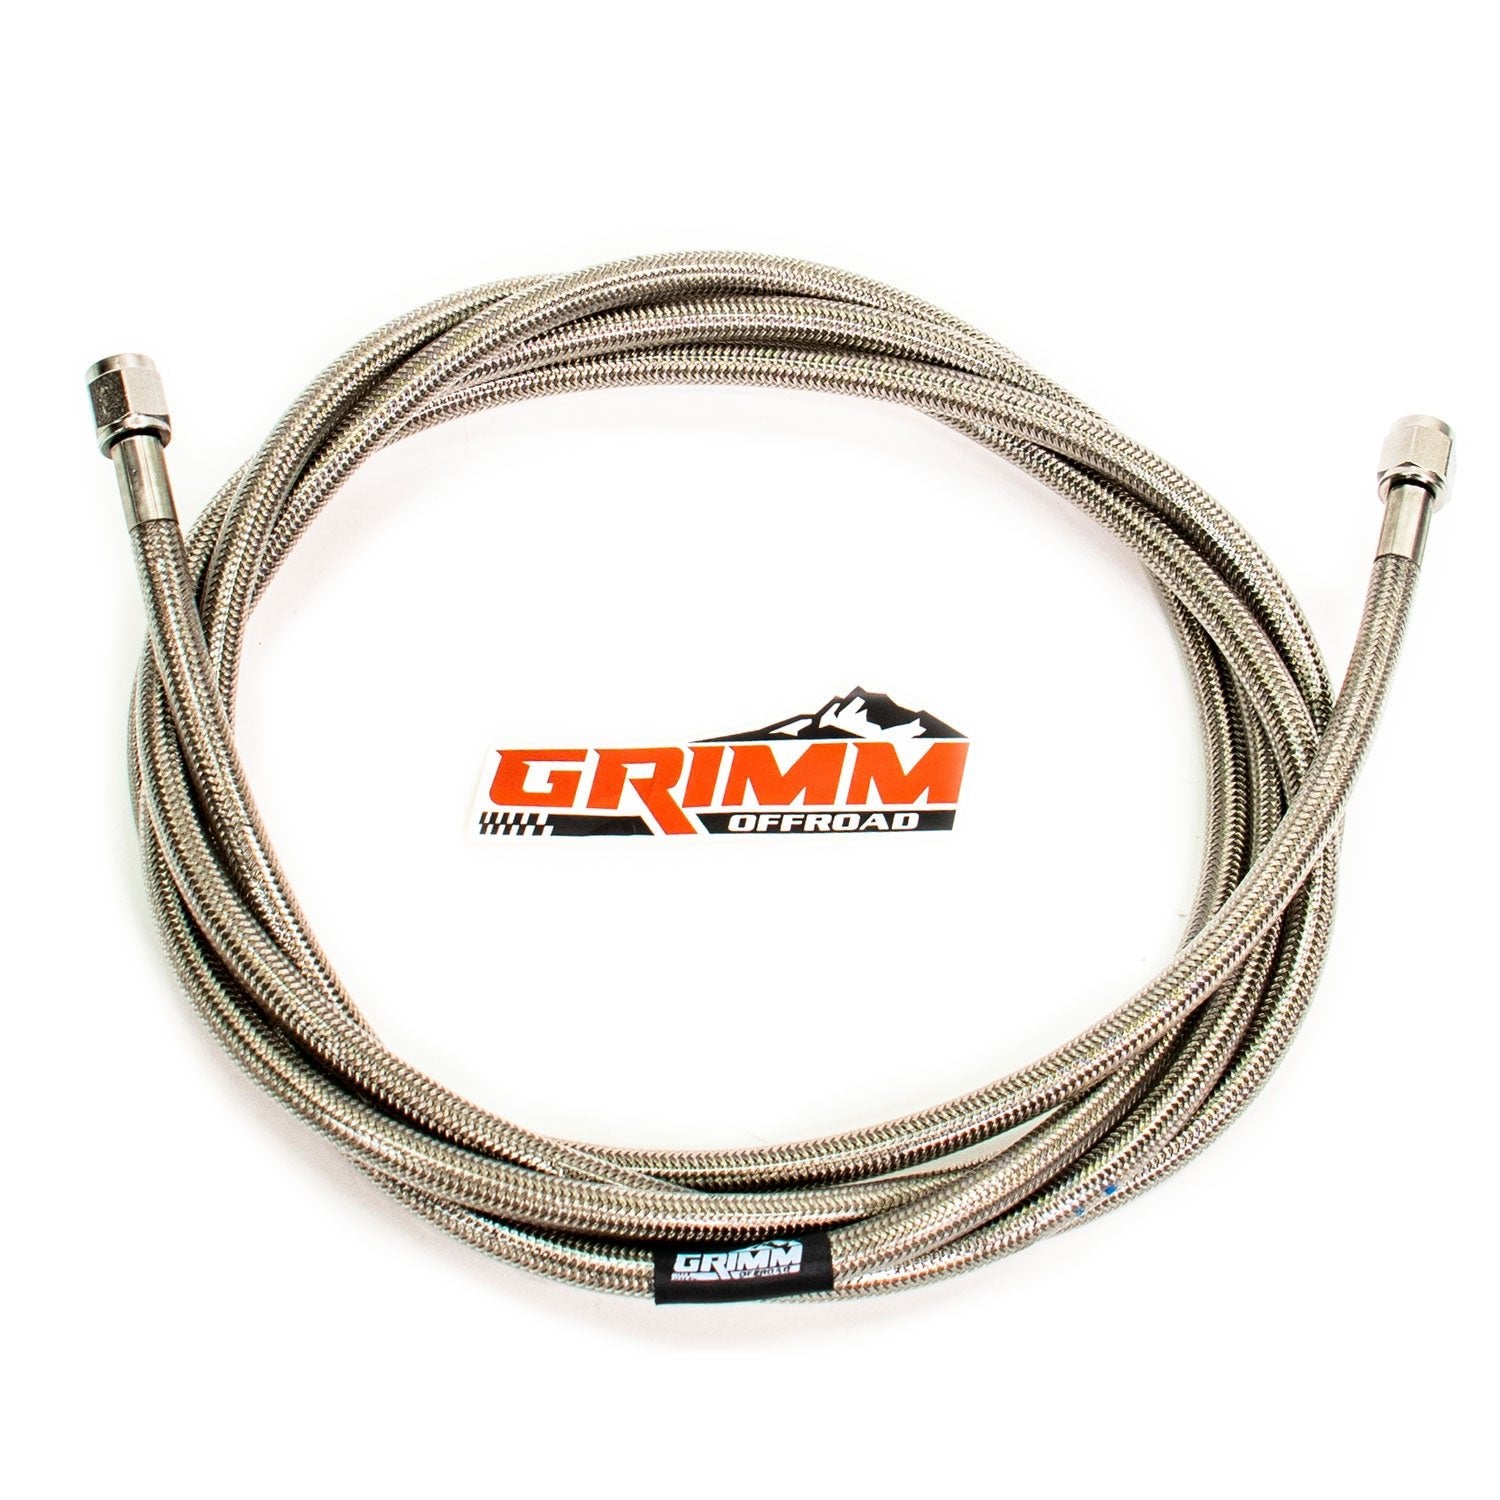 Air Hose Reinforced JIC-4 120 Inch Grimm Offroad - Offroad Outfitters